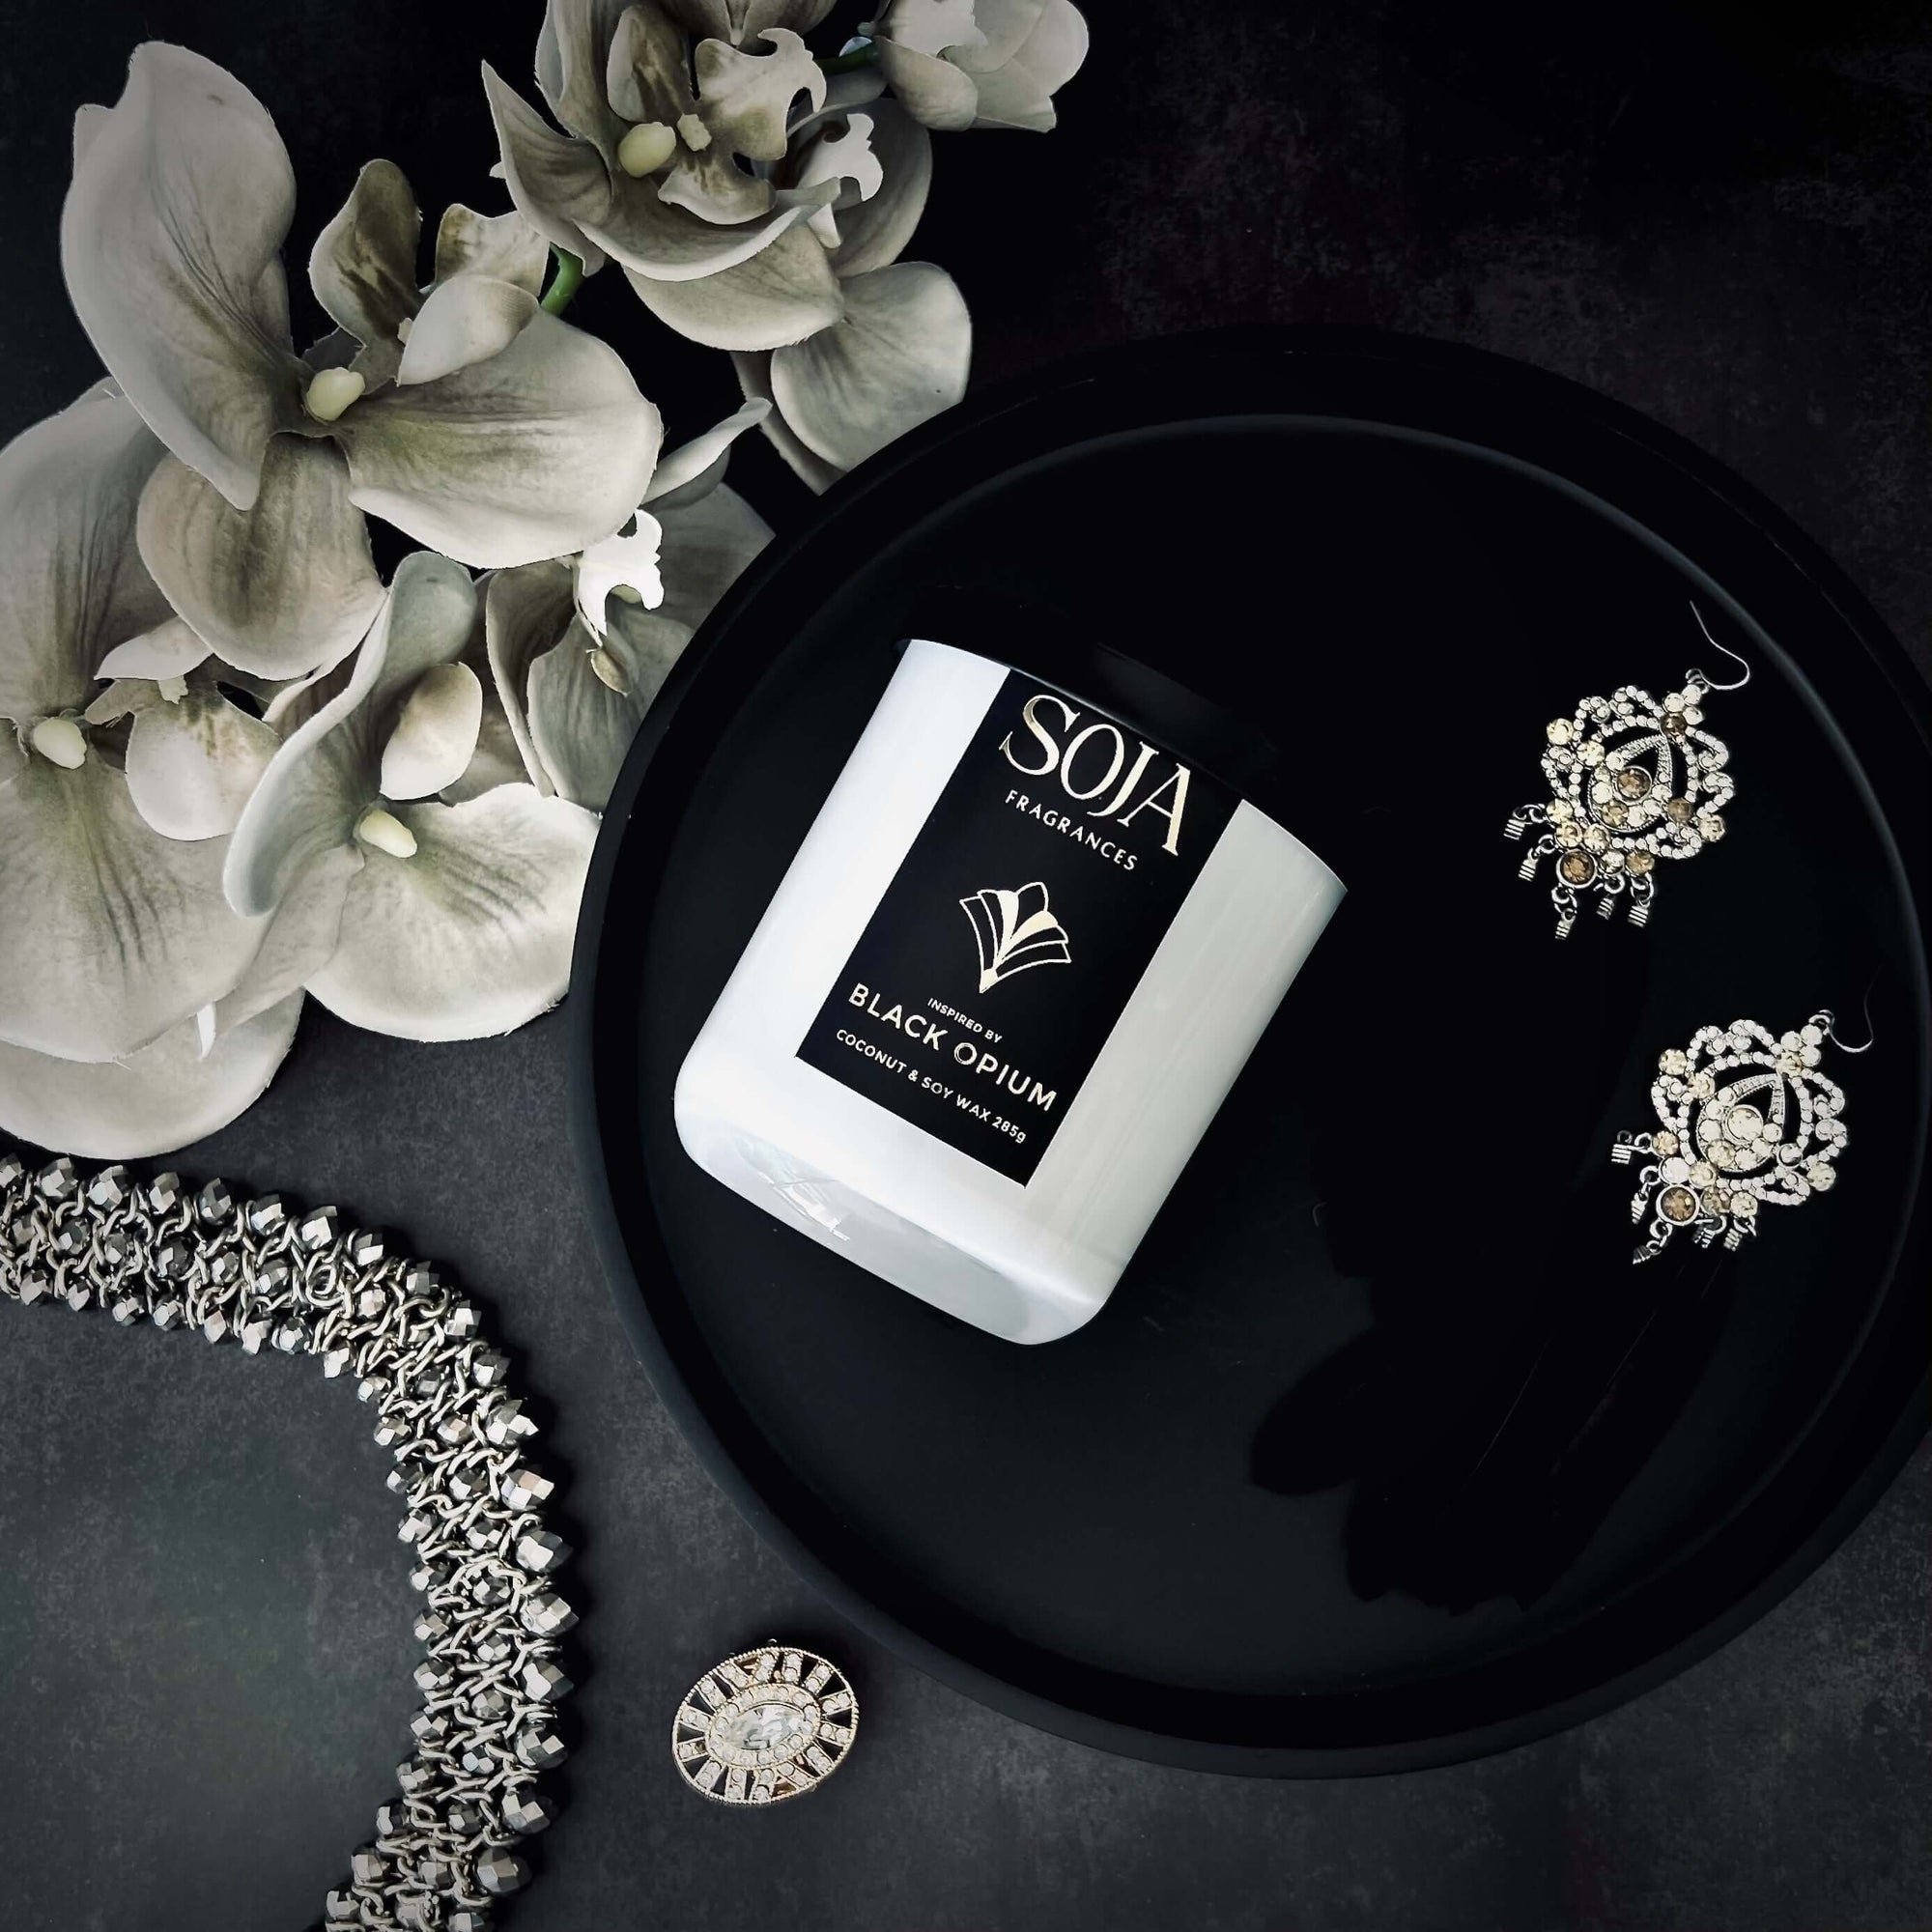 Black opium perfumed candle 285 grams on black tray with white orchids and diamond jewellery